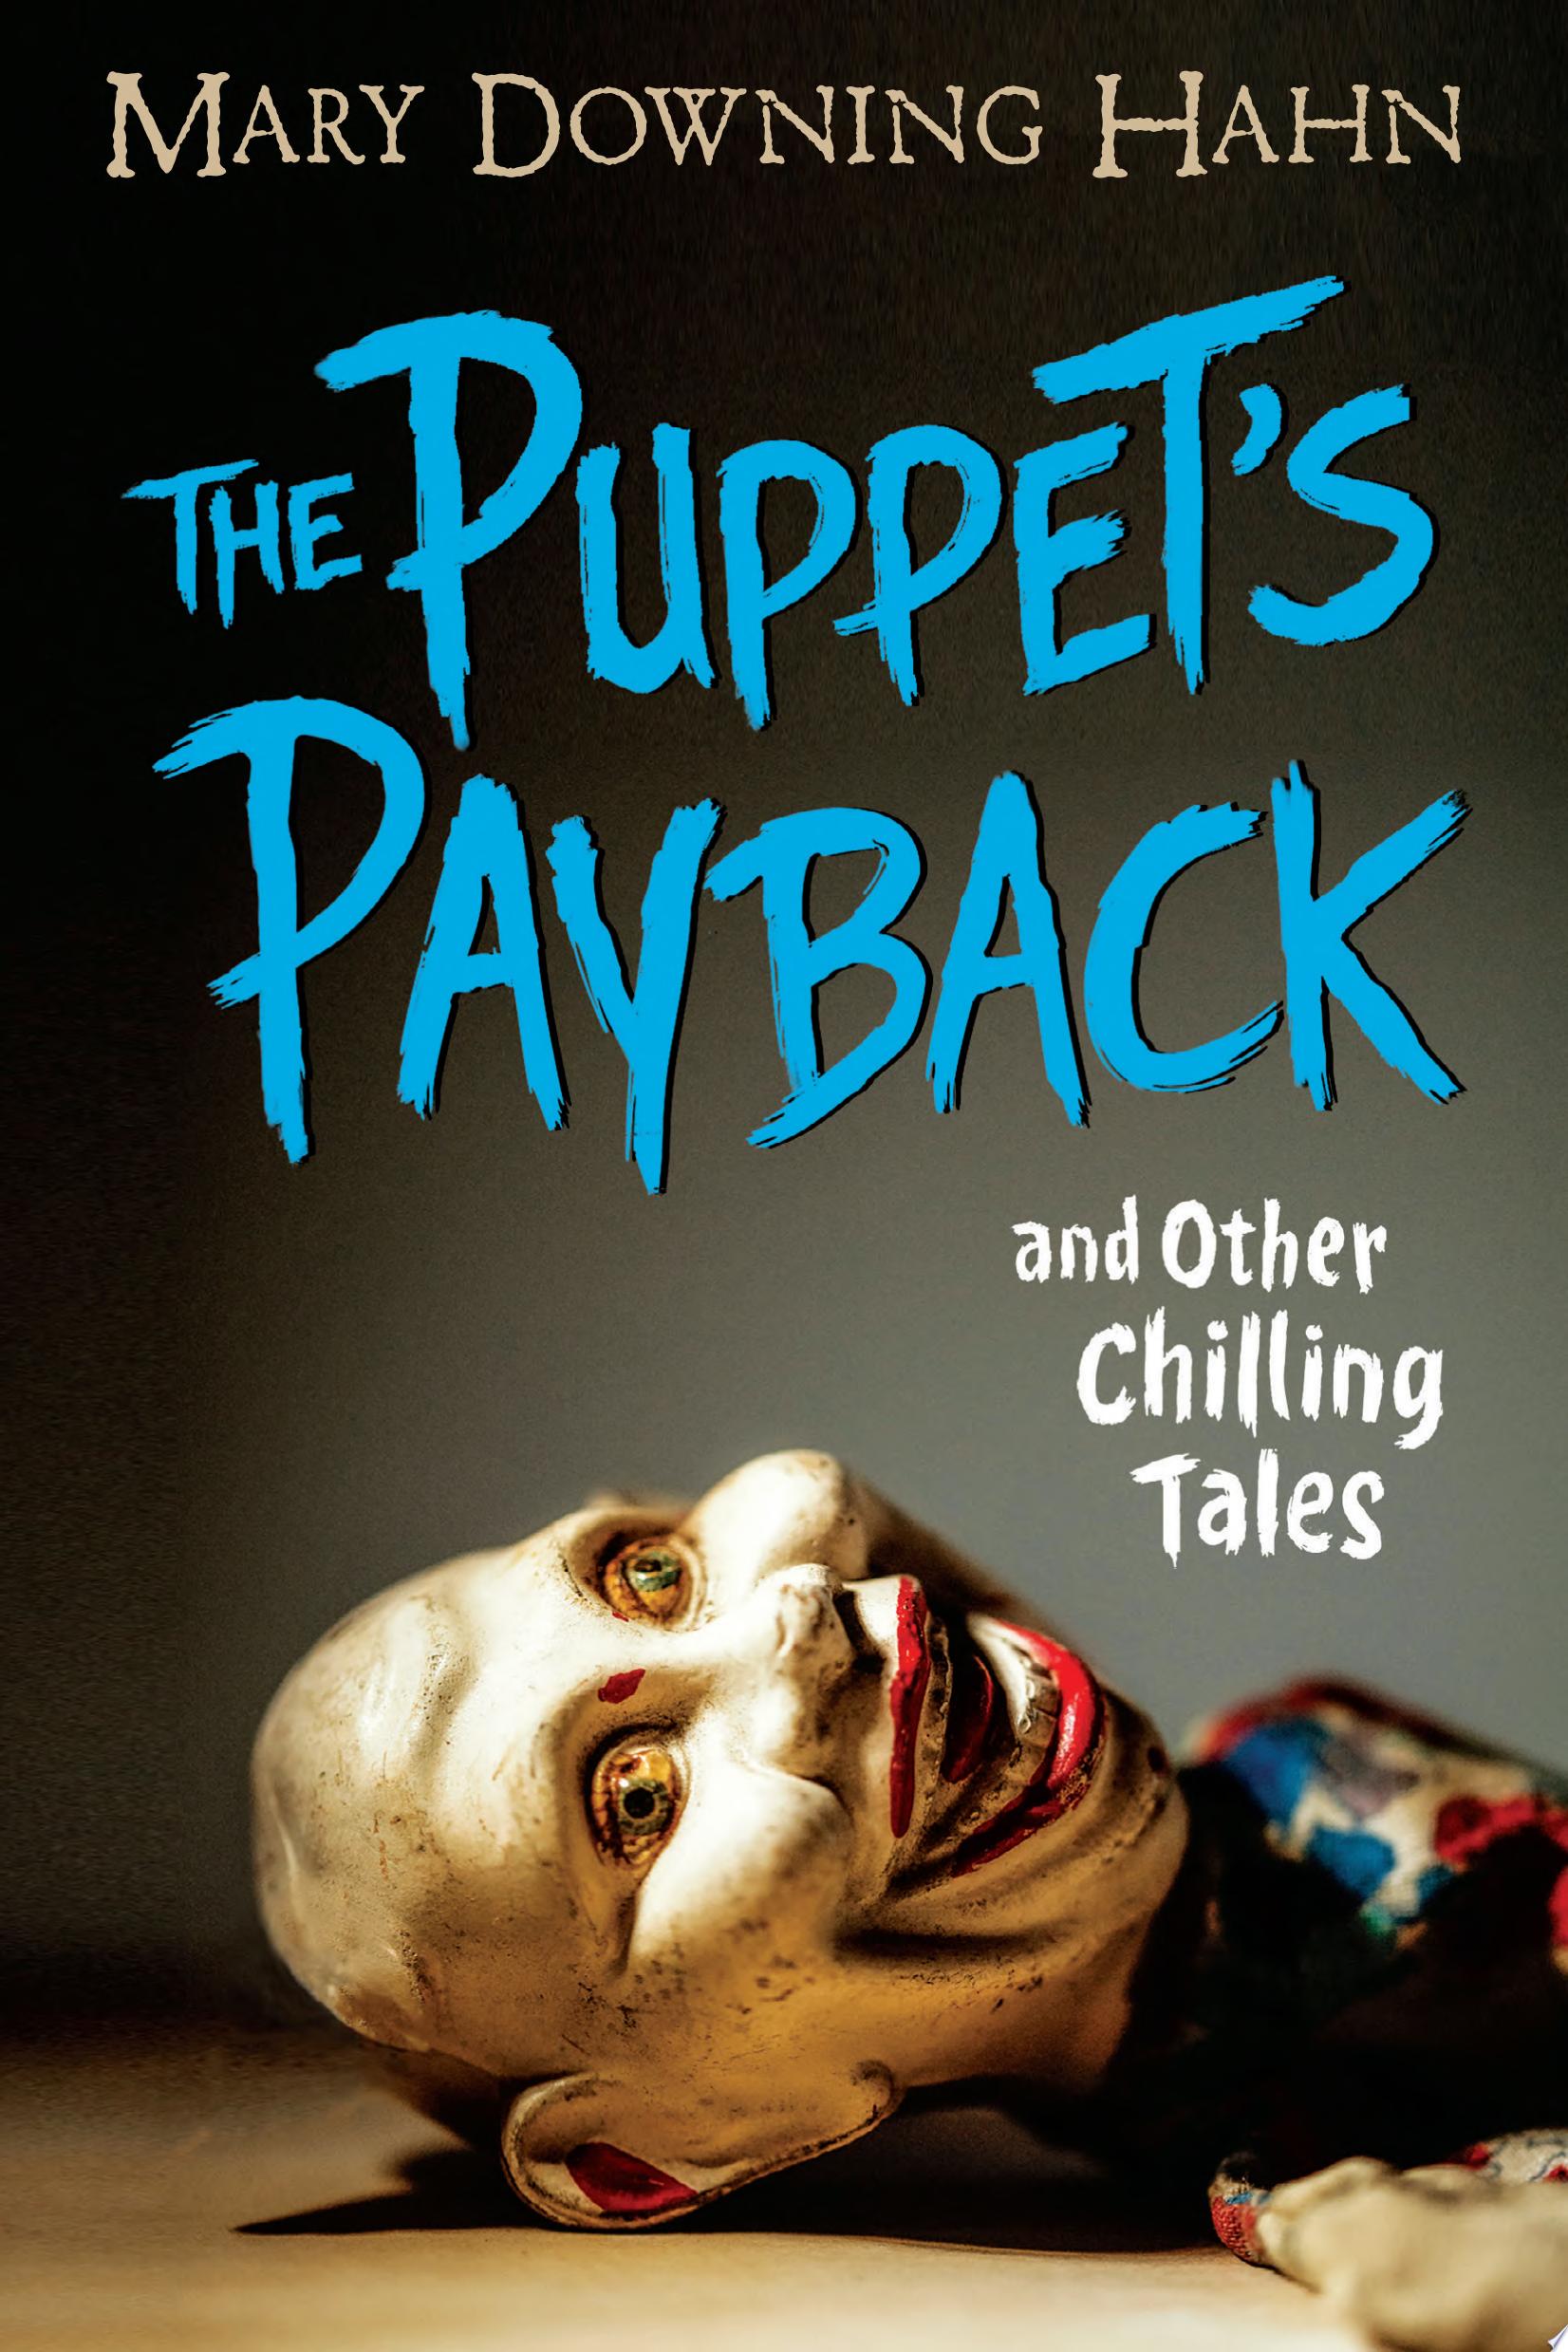 Image for "The Puppet&#039;s Payback and Other Chilling Tales"